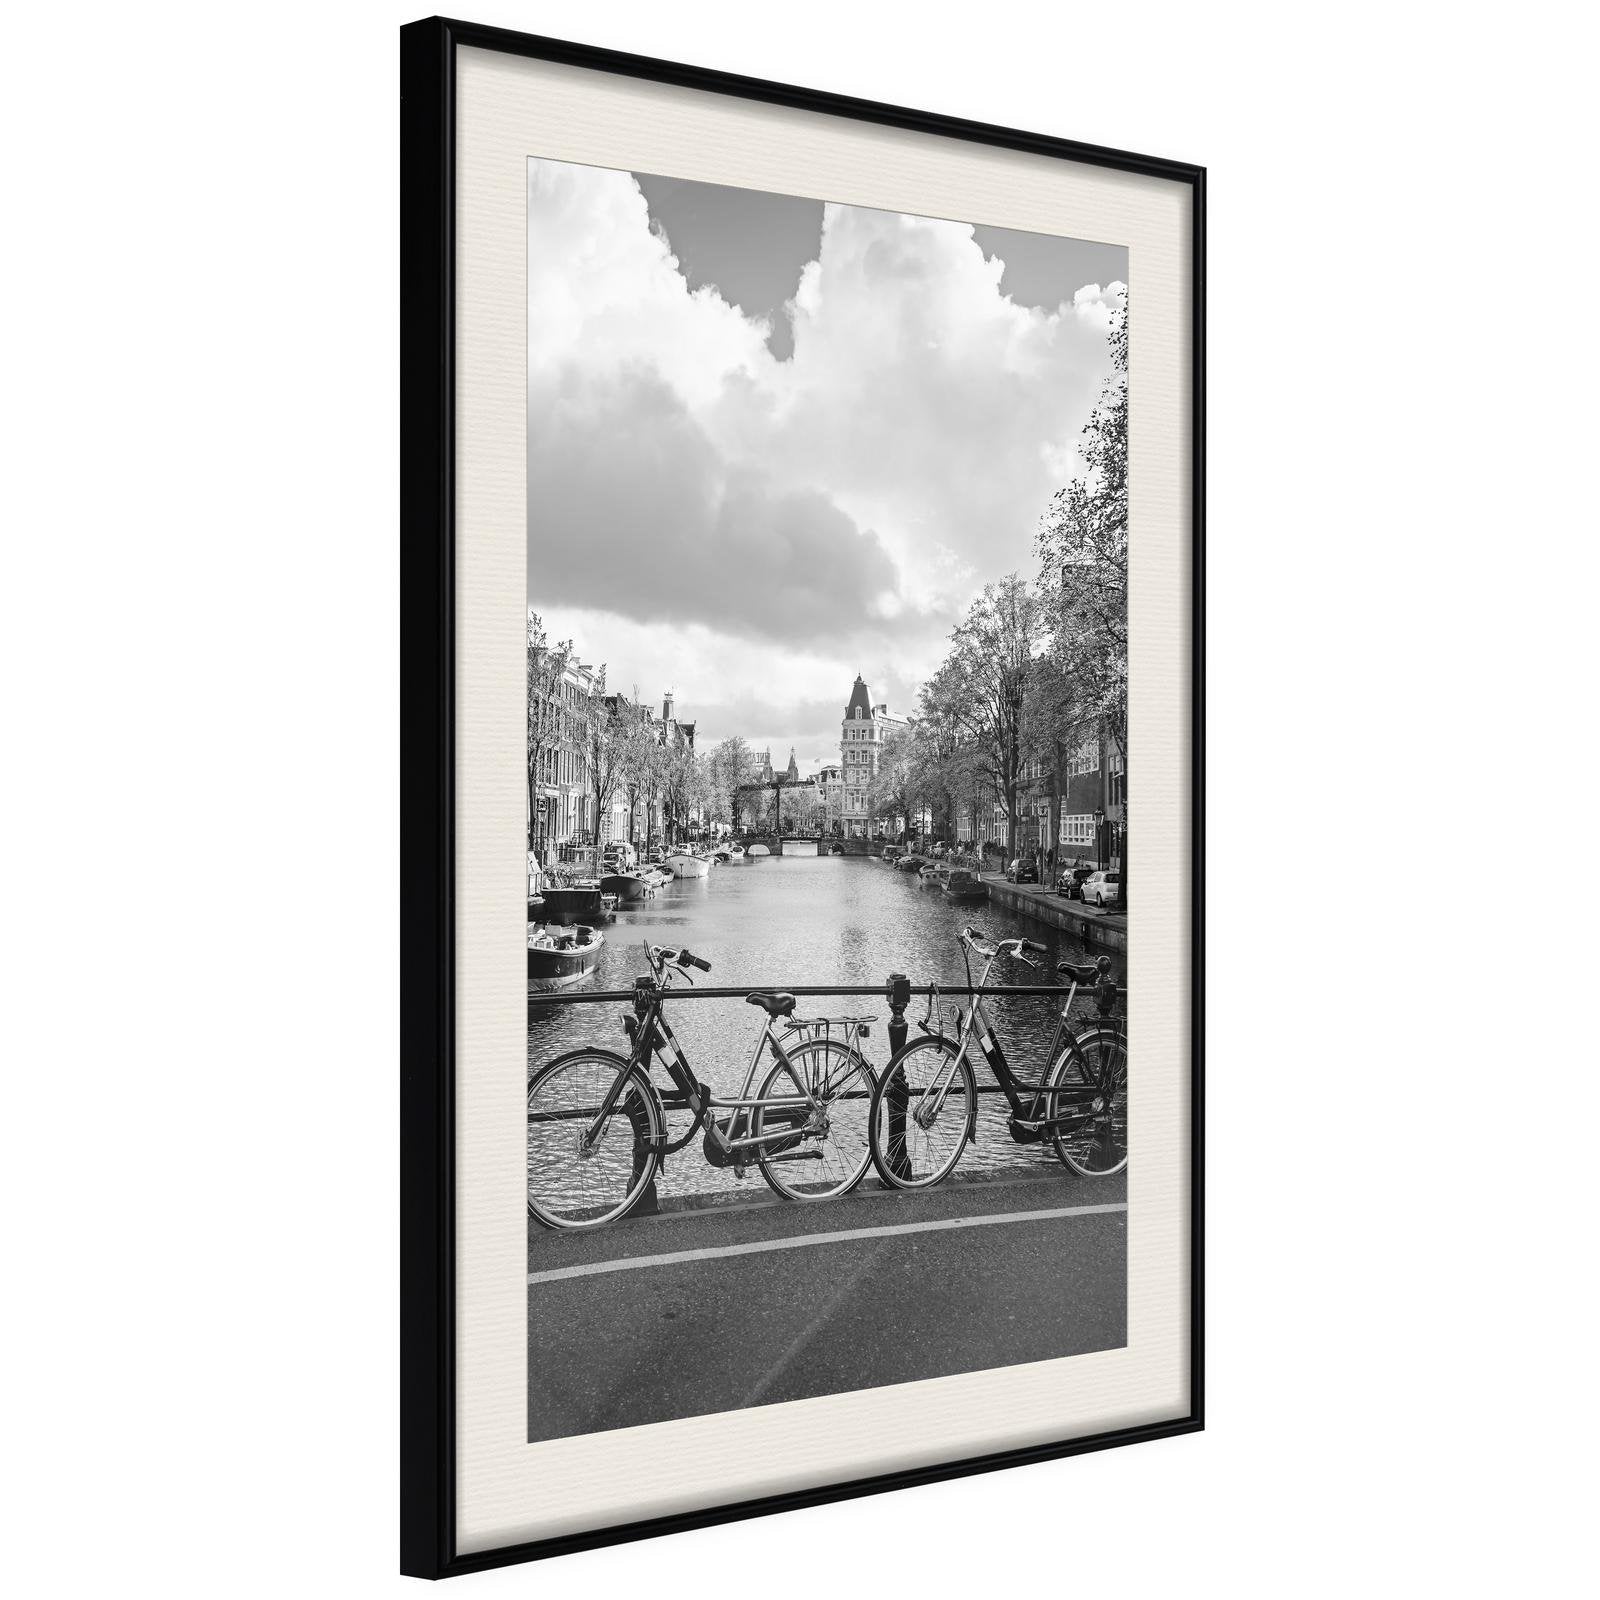 Inramad Poster / Tavla - Bicycles Against Canal-Poster Inramad-Artgeist-20x30-Svart ram med passepartout-peaceofhome.se